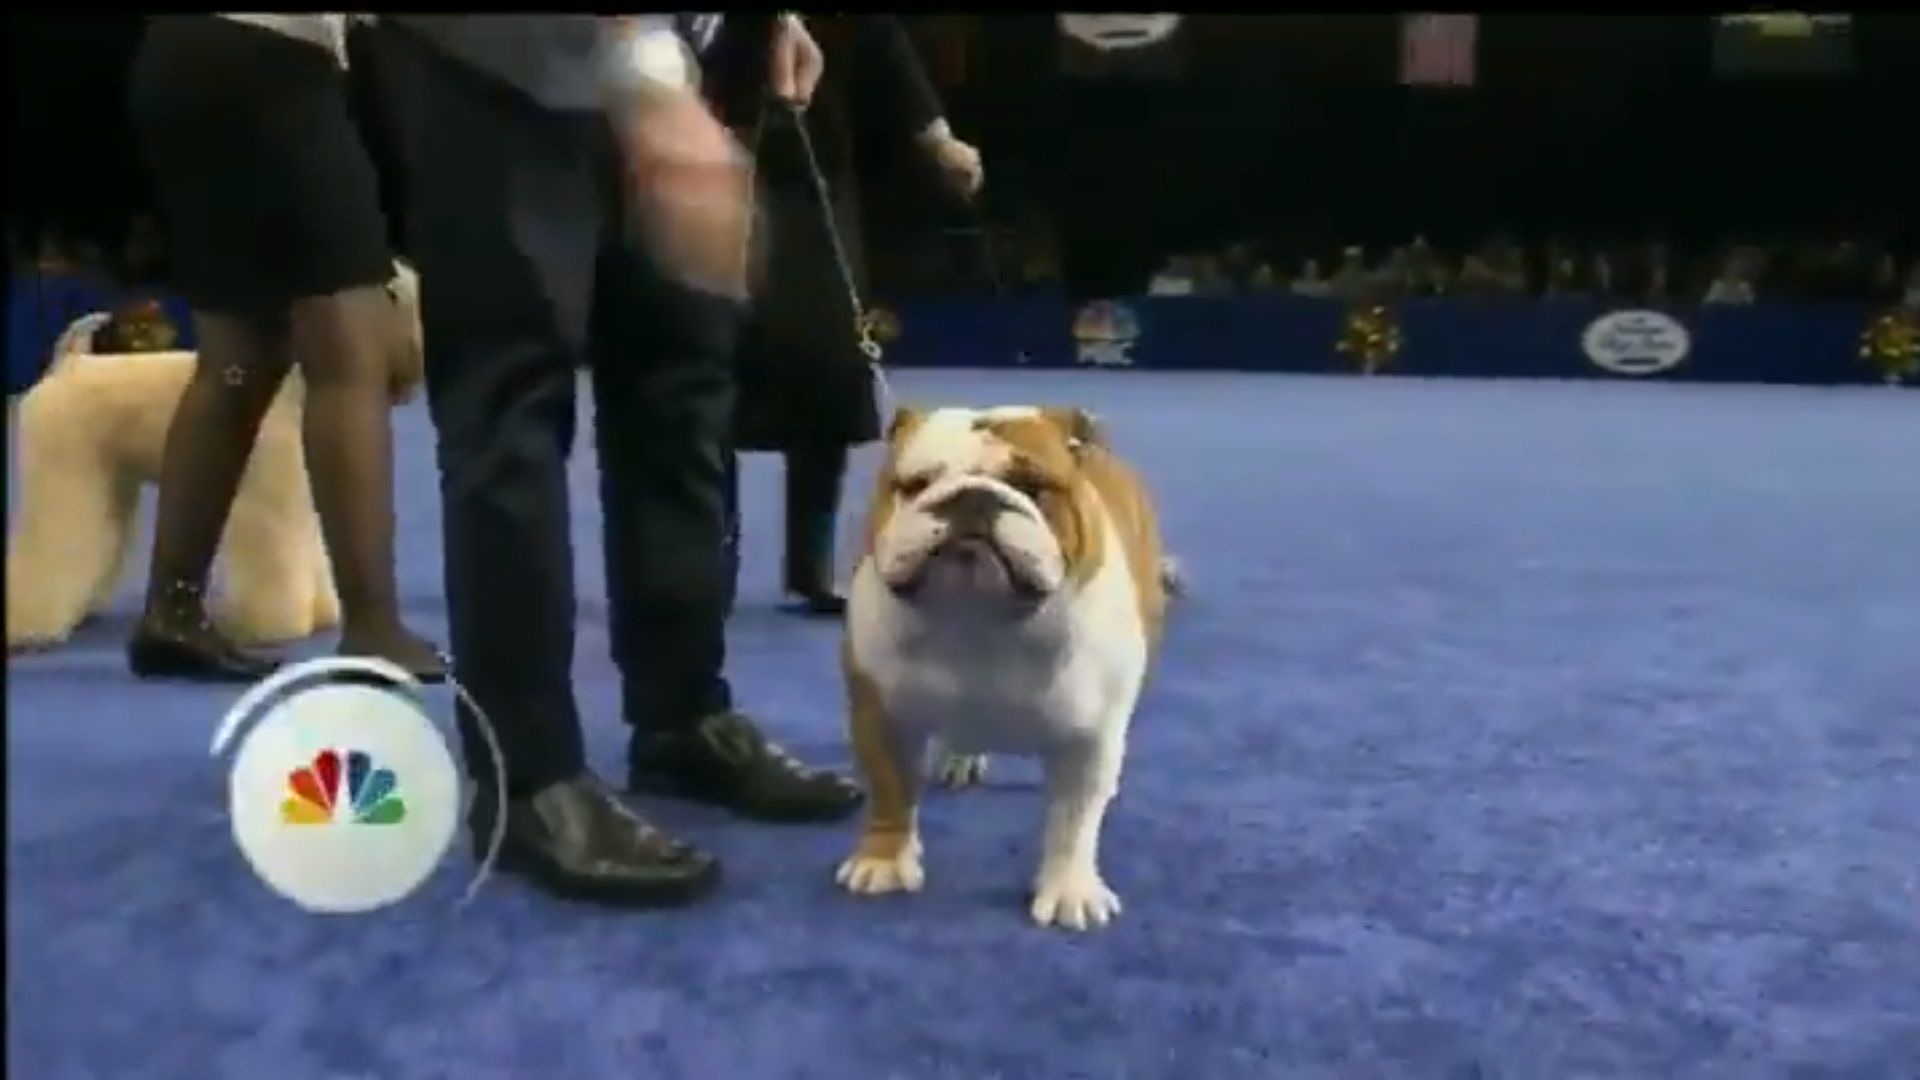 Thor The Chunky Bulldog Won The National Dog Show And It Was A Well-Deserved Victory